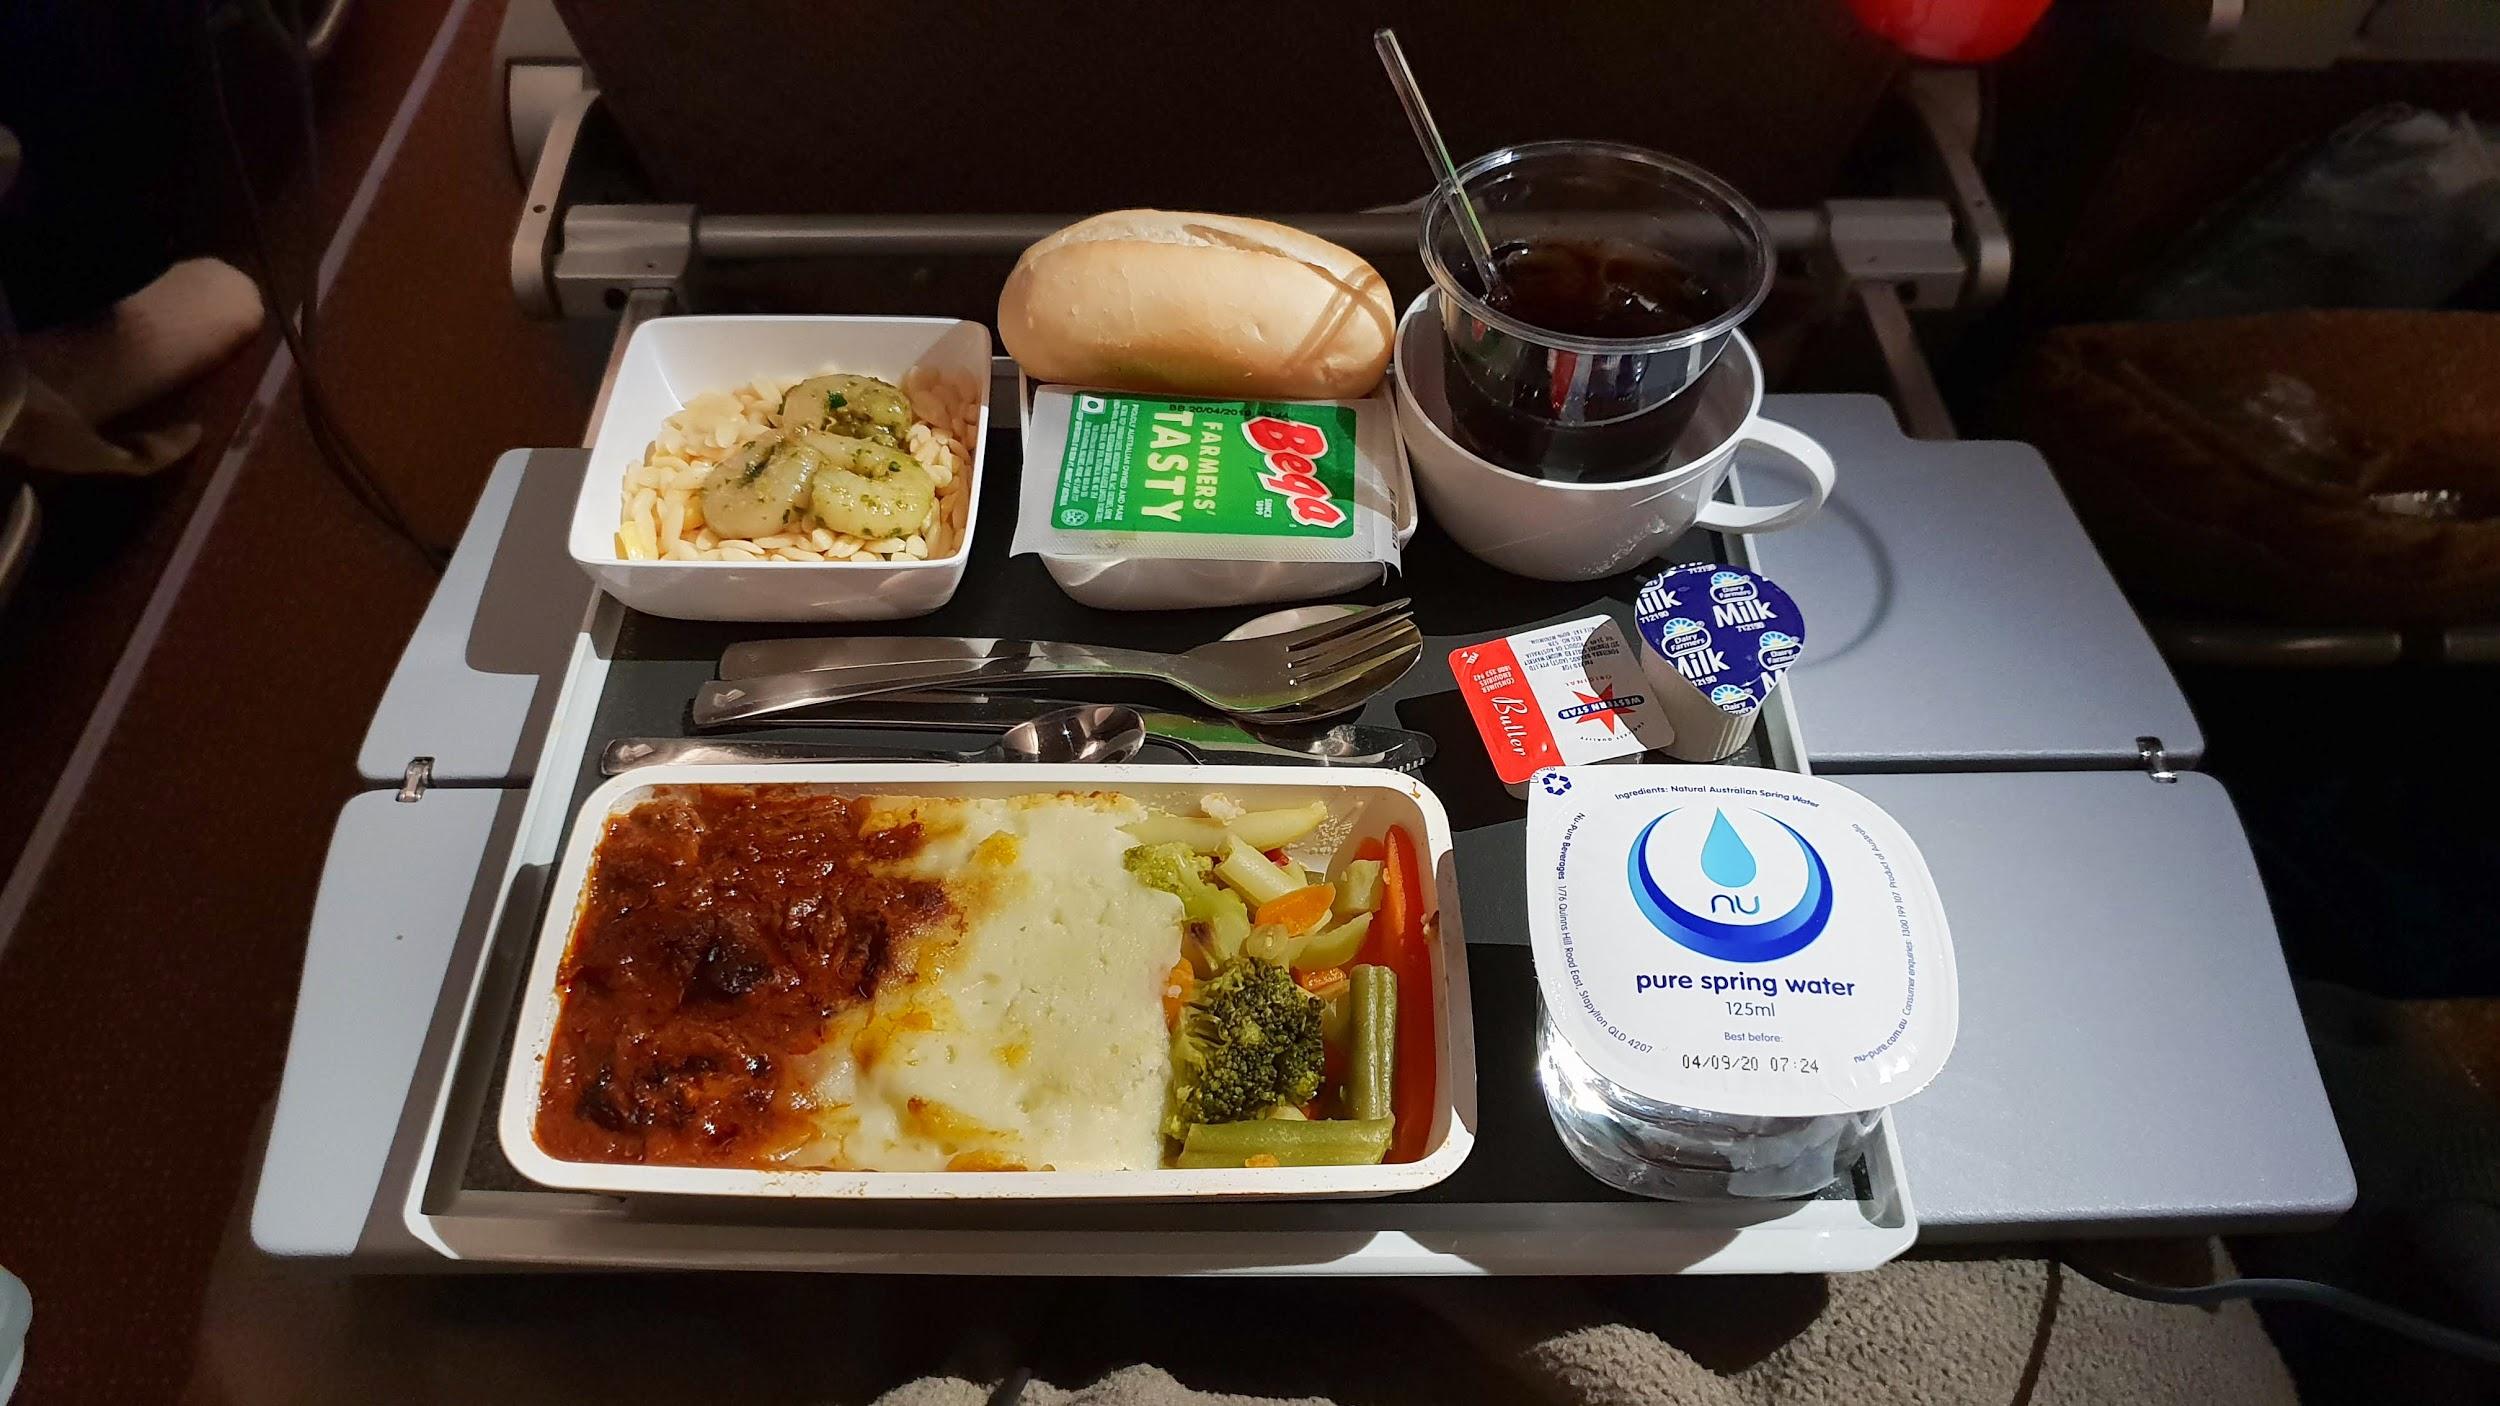 Singapore Airlines A350 Economy meal